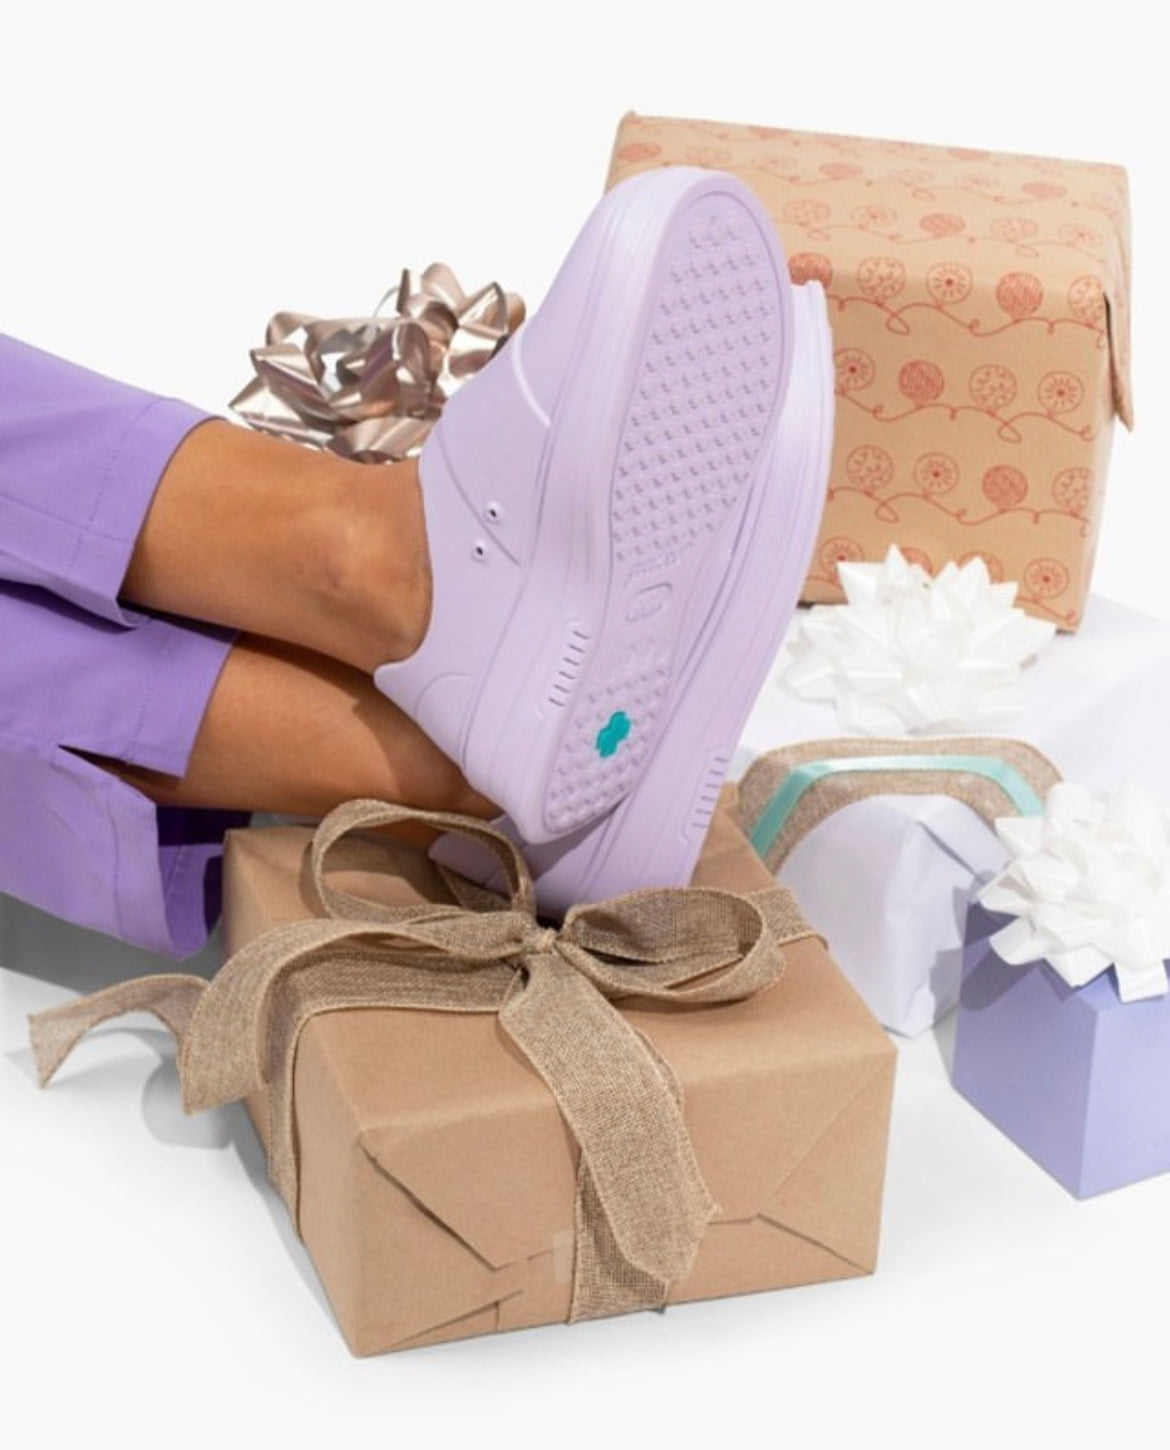 Top 3 Reasons to Add Gales® to Your Holiday Gifting